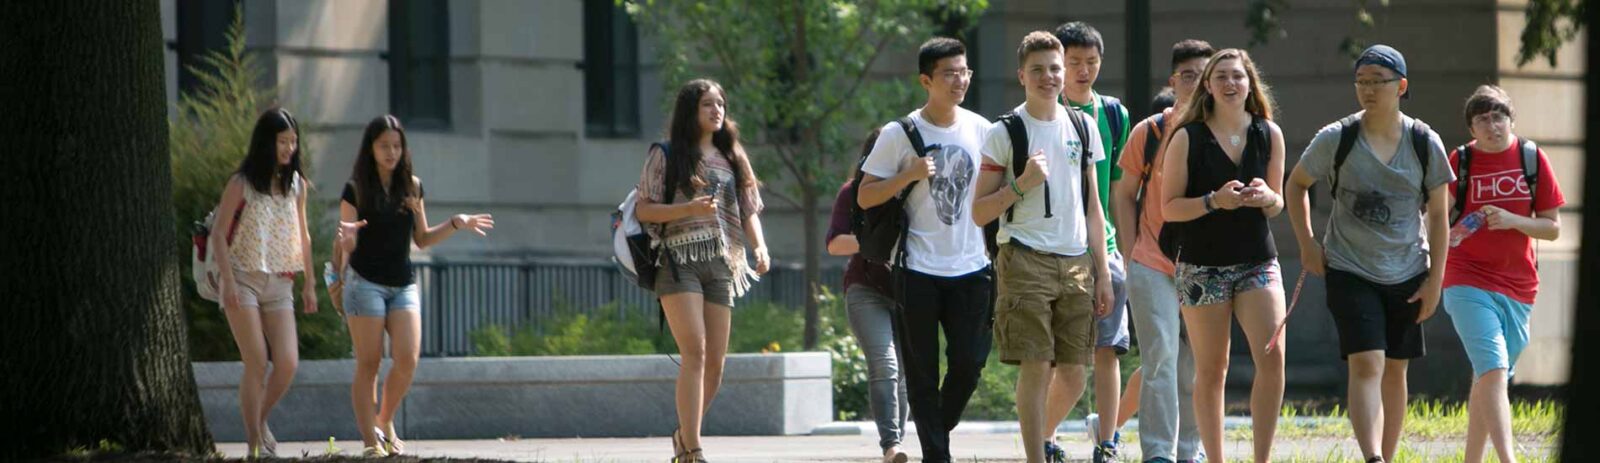 Students walk along the sidewalk in the Ag Quad on campus.